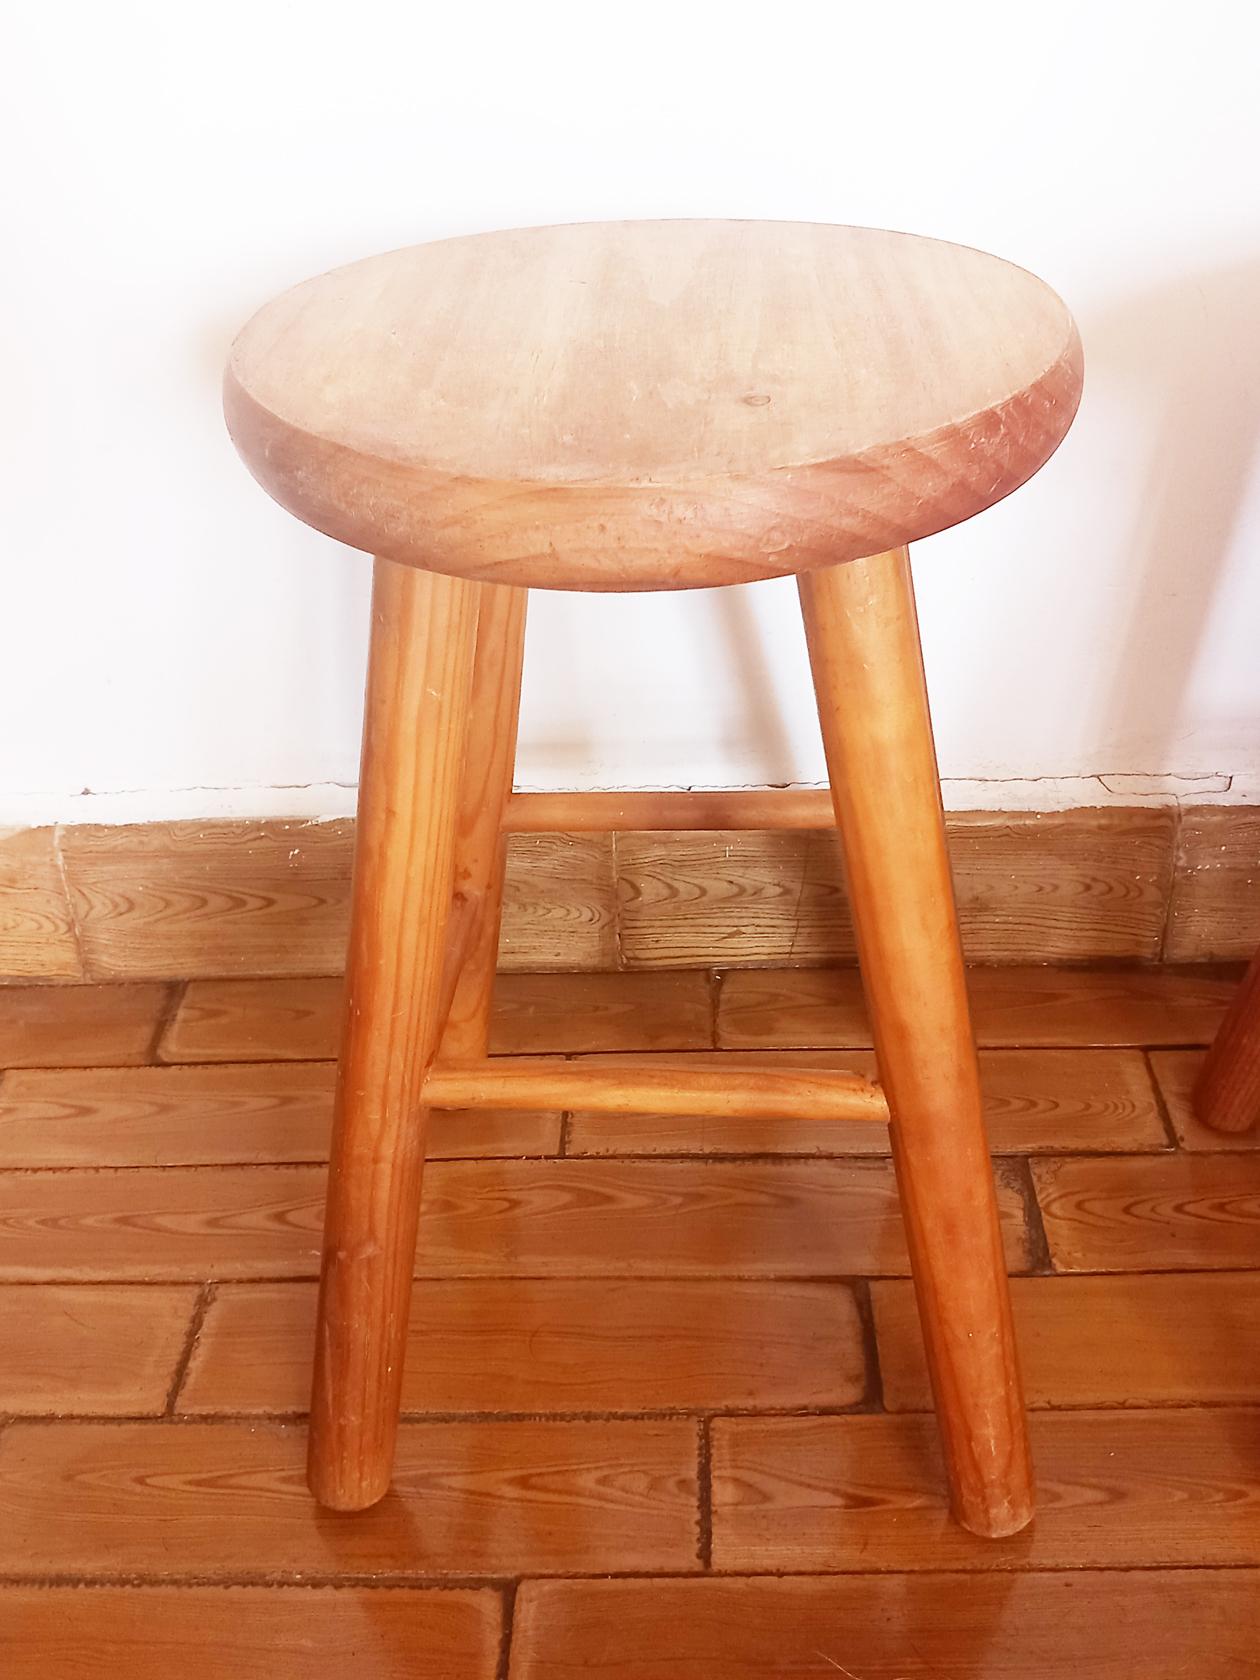 Stools from the Mid 20th Century in Natural Wood For Sale 9